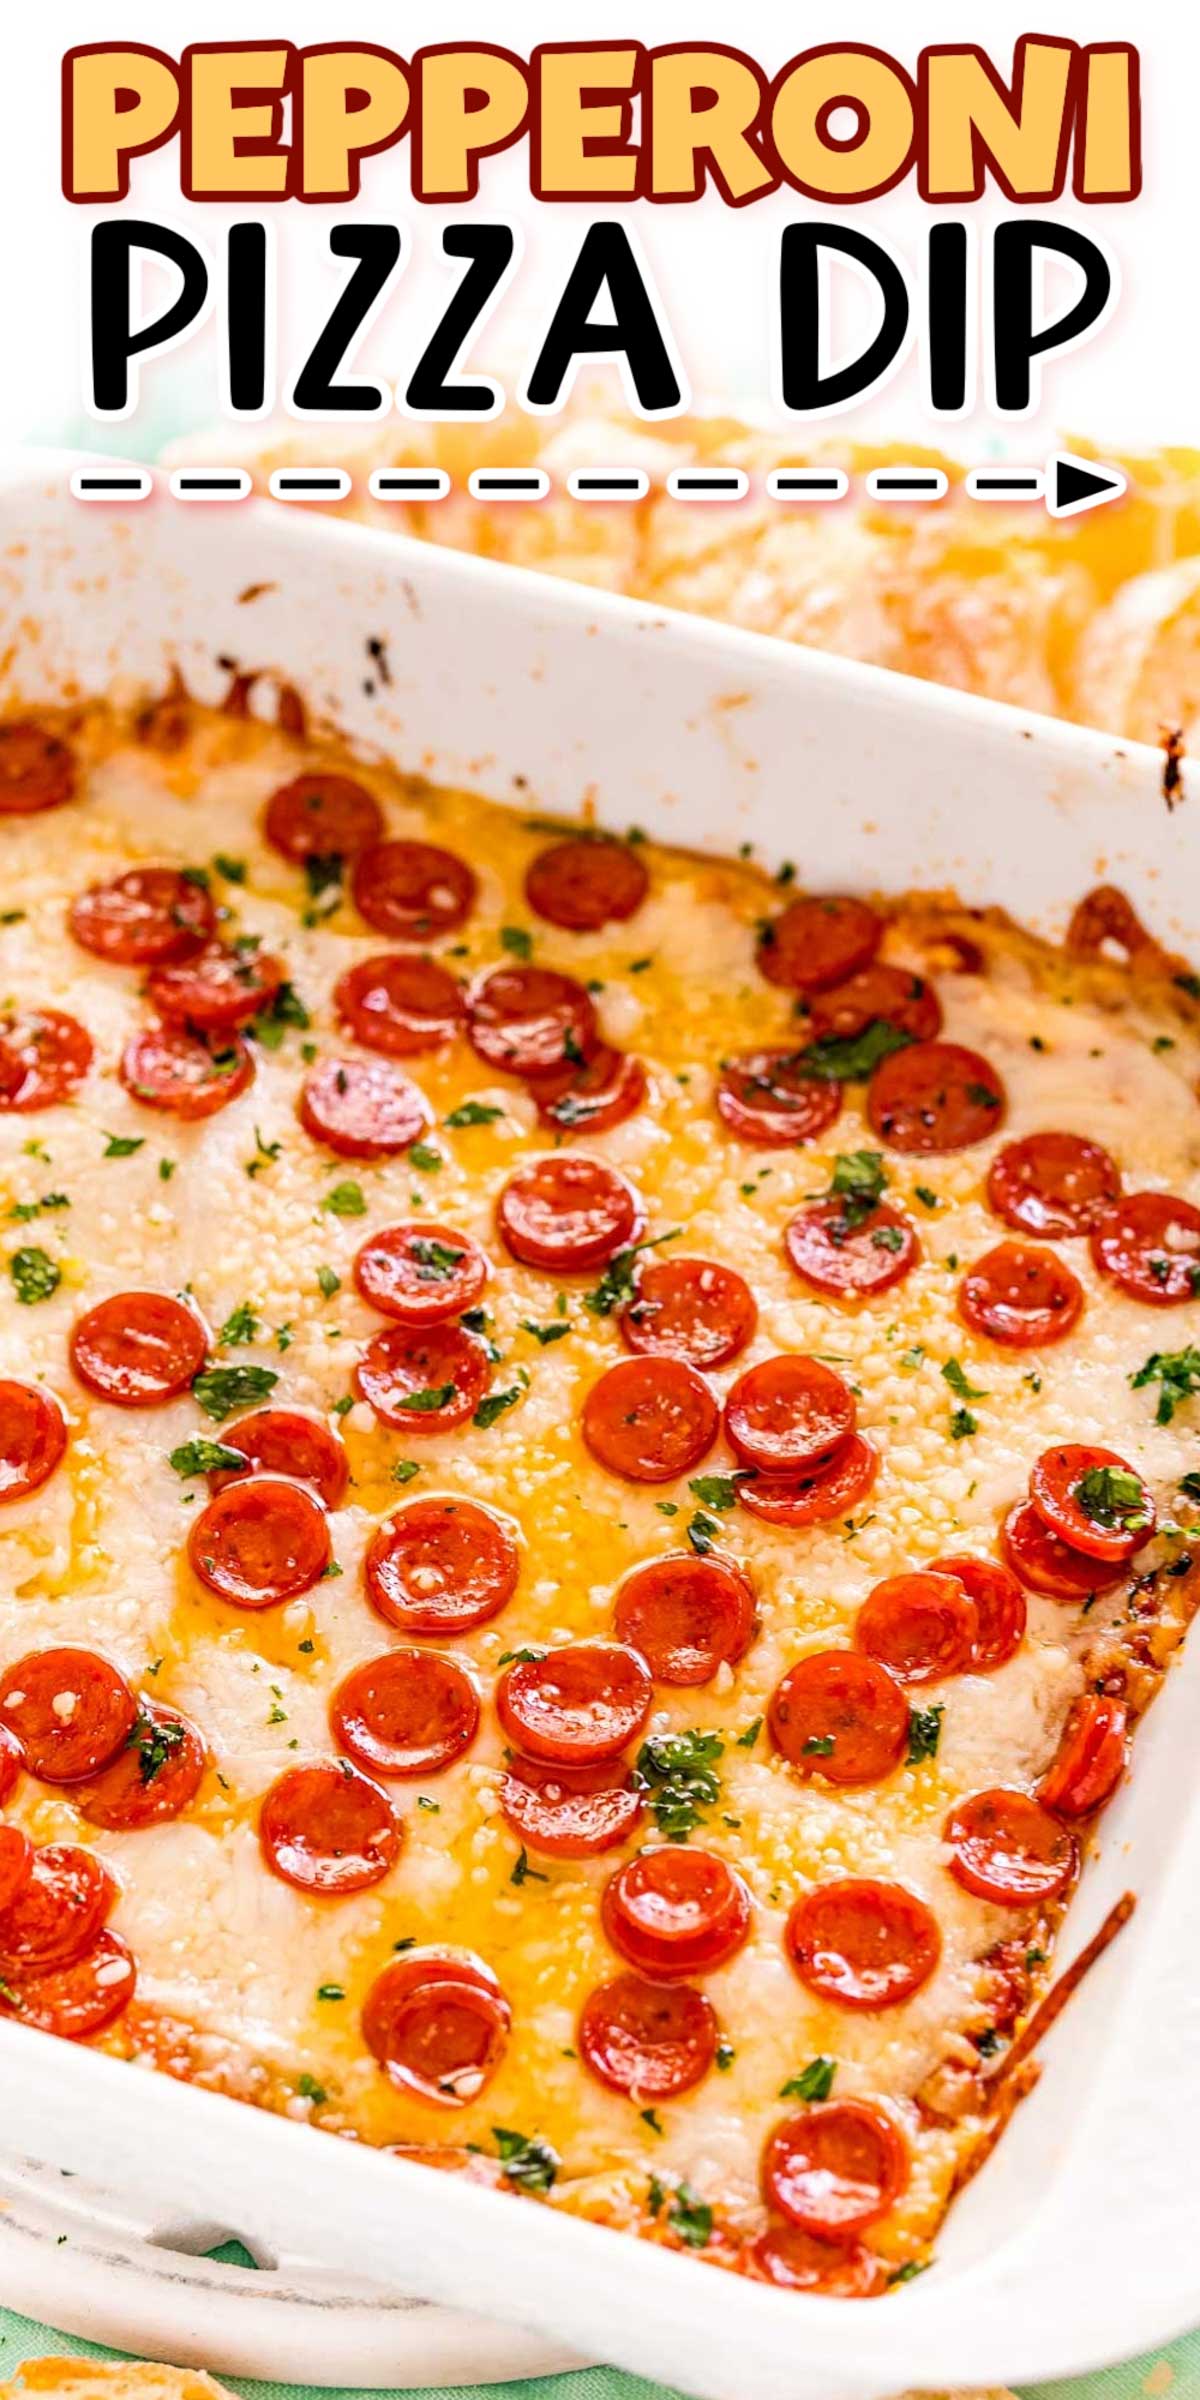 Pizza Dip is a warm cheesy appetizer perfect for game day parties, potlucks, or holidays! Pair this dip with your favorite tortilla chips, crackers, bread, or even vegetables and watch it quickly disappear as it becomes the crowd favorite!  via @sugarandsoulco